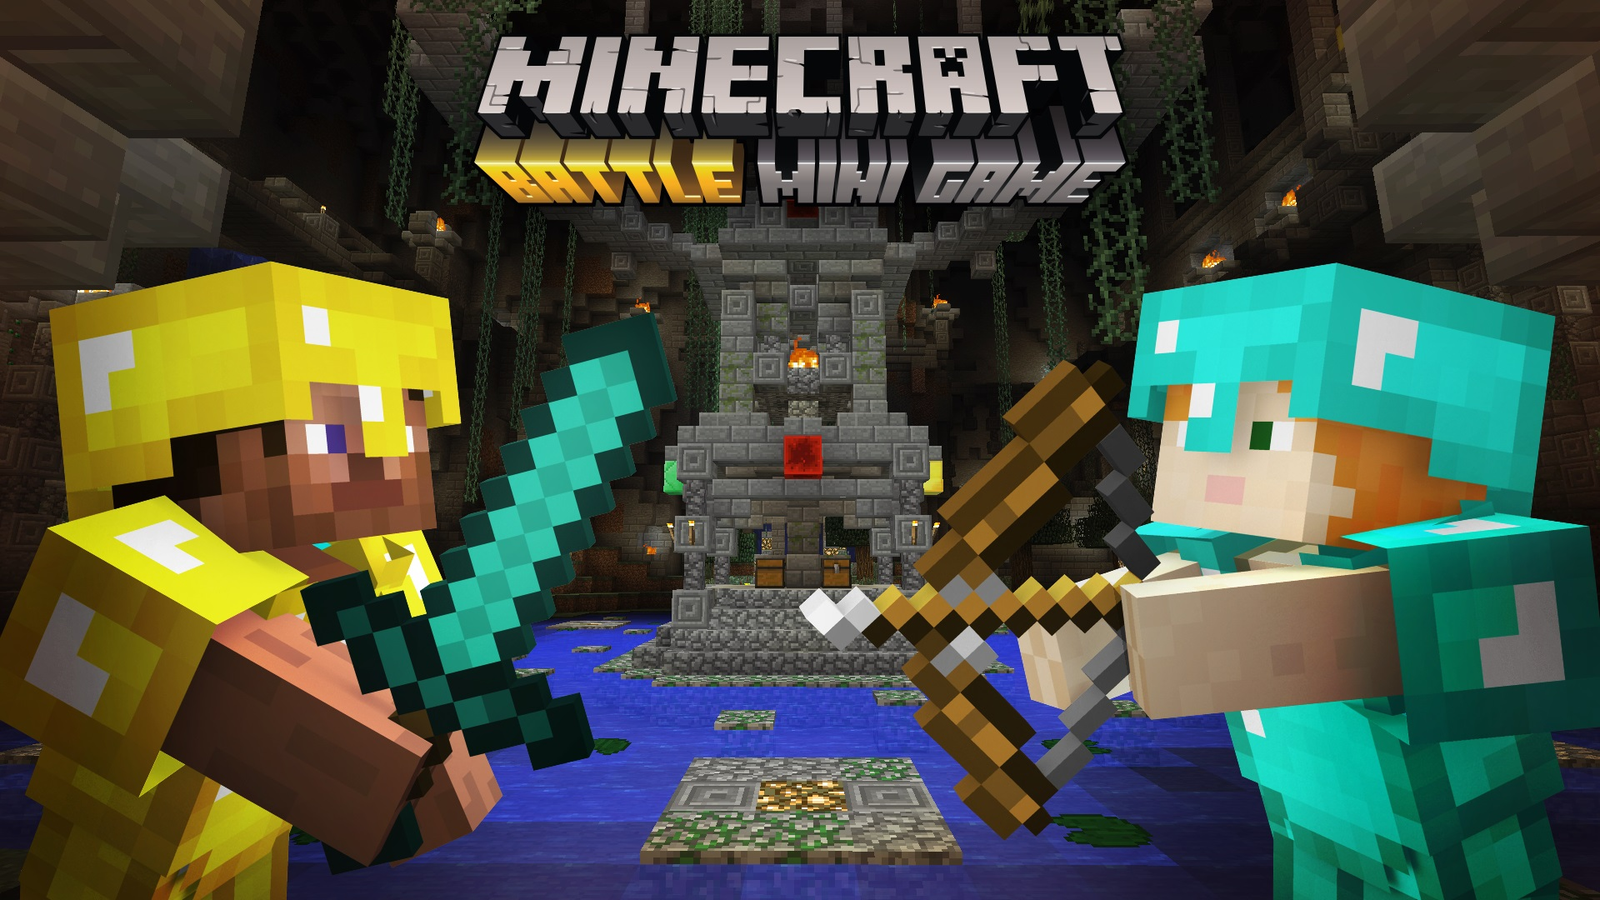 Minecraft PlayStation Vita release date finally announced